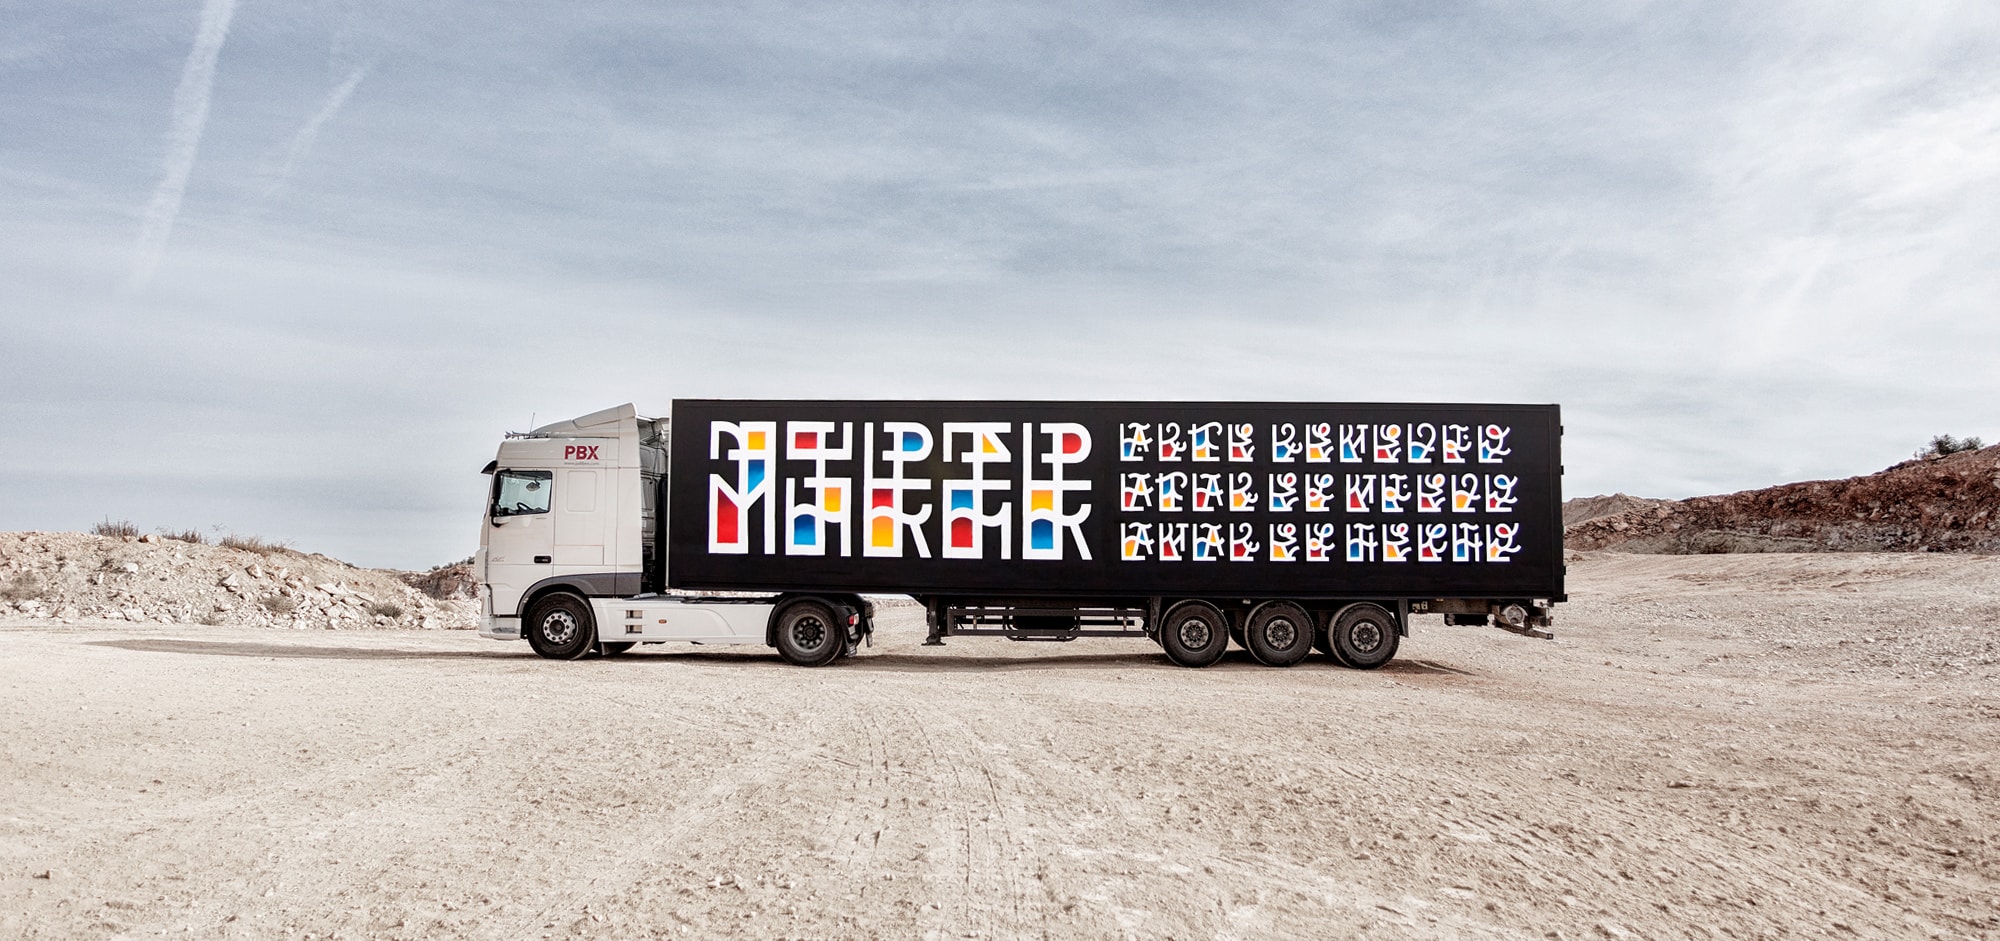 REMED - TRUCK ART PROJECT - 2